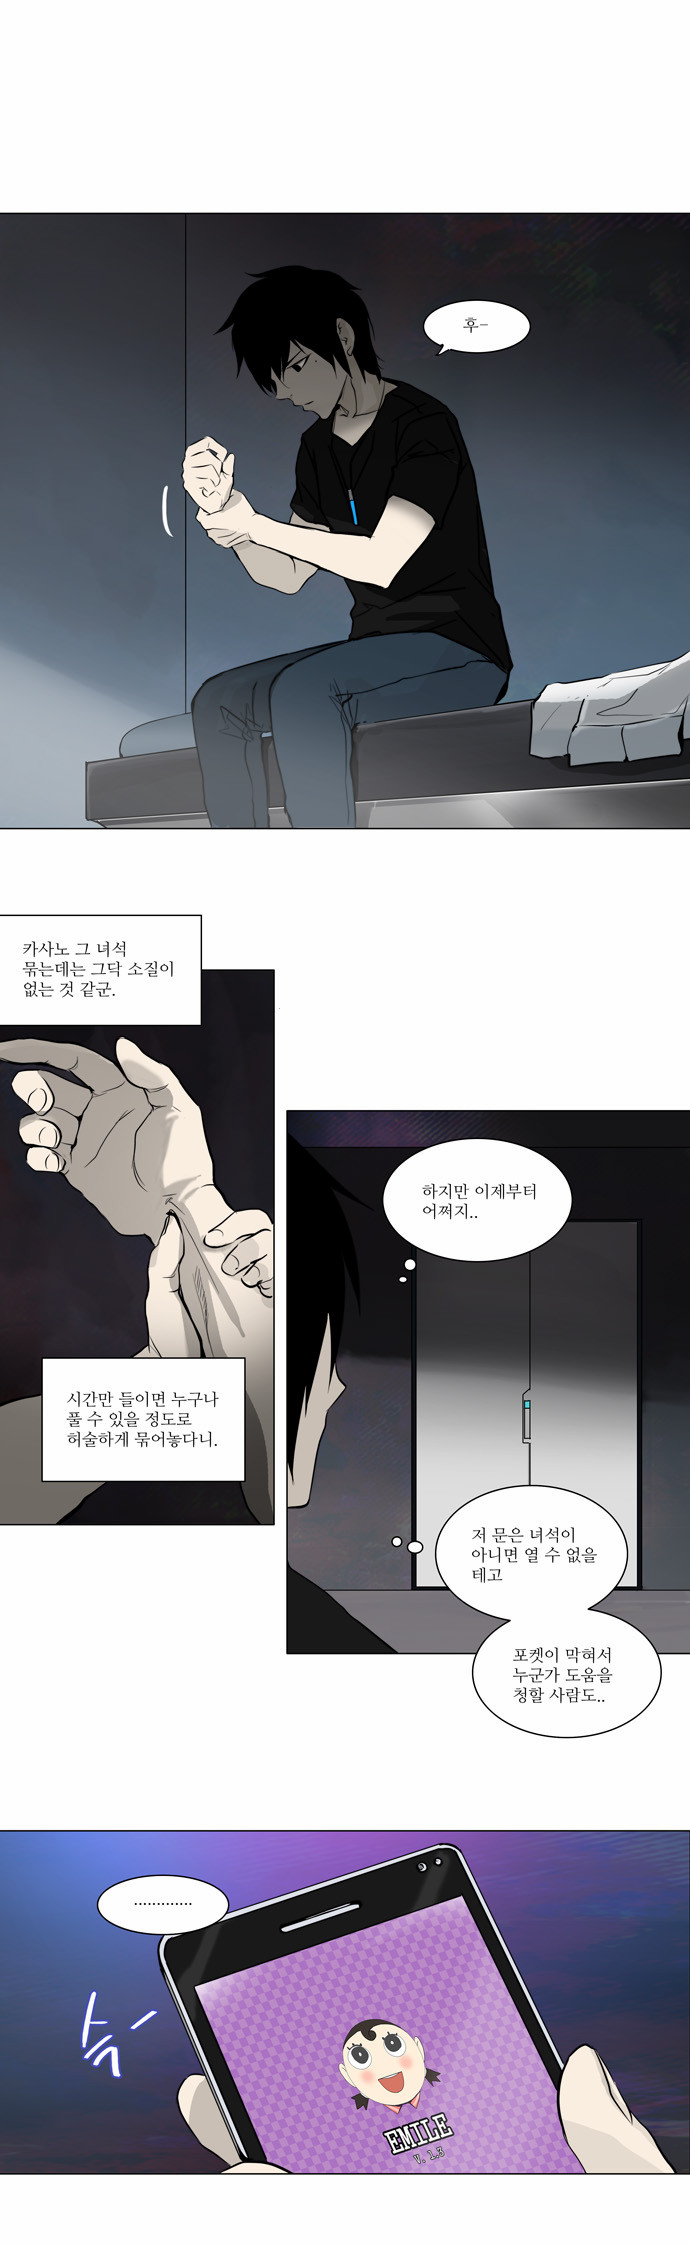 Tower of God - Chapter 153 - Page 1